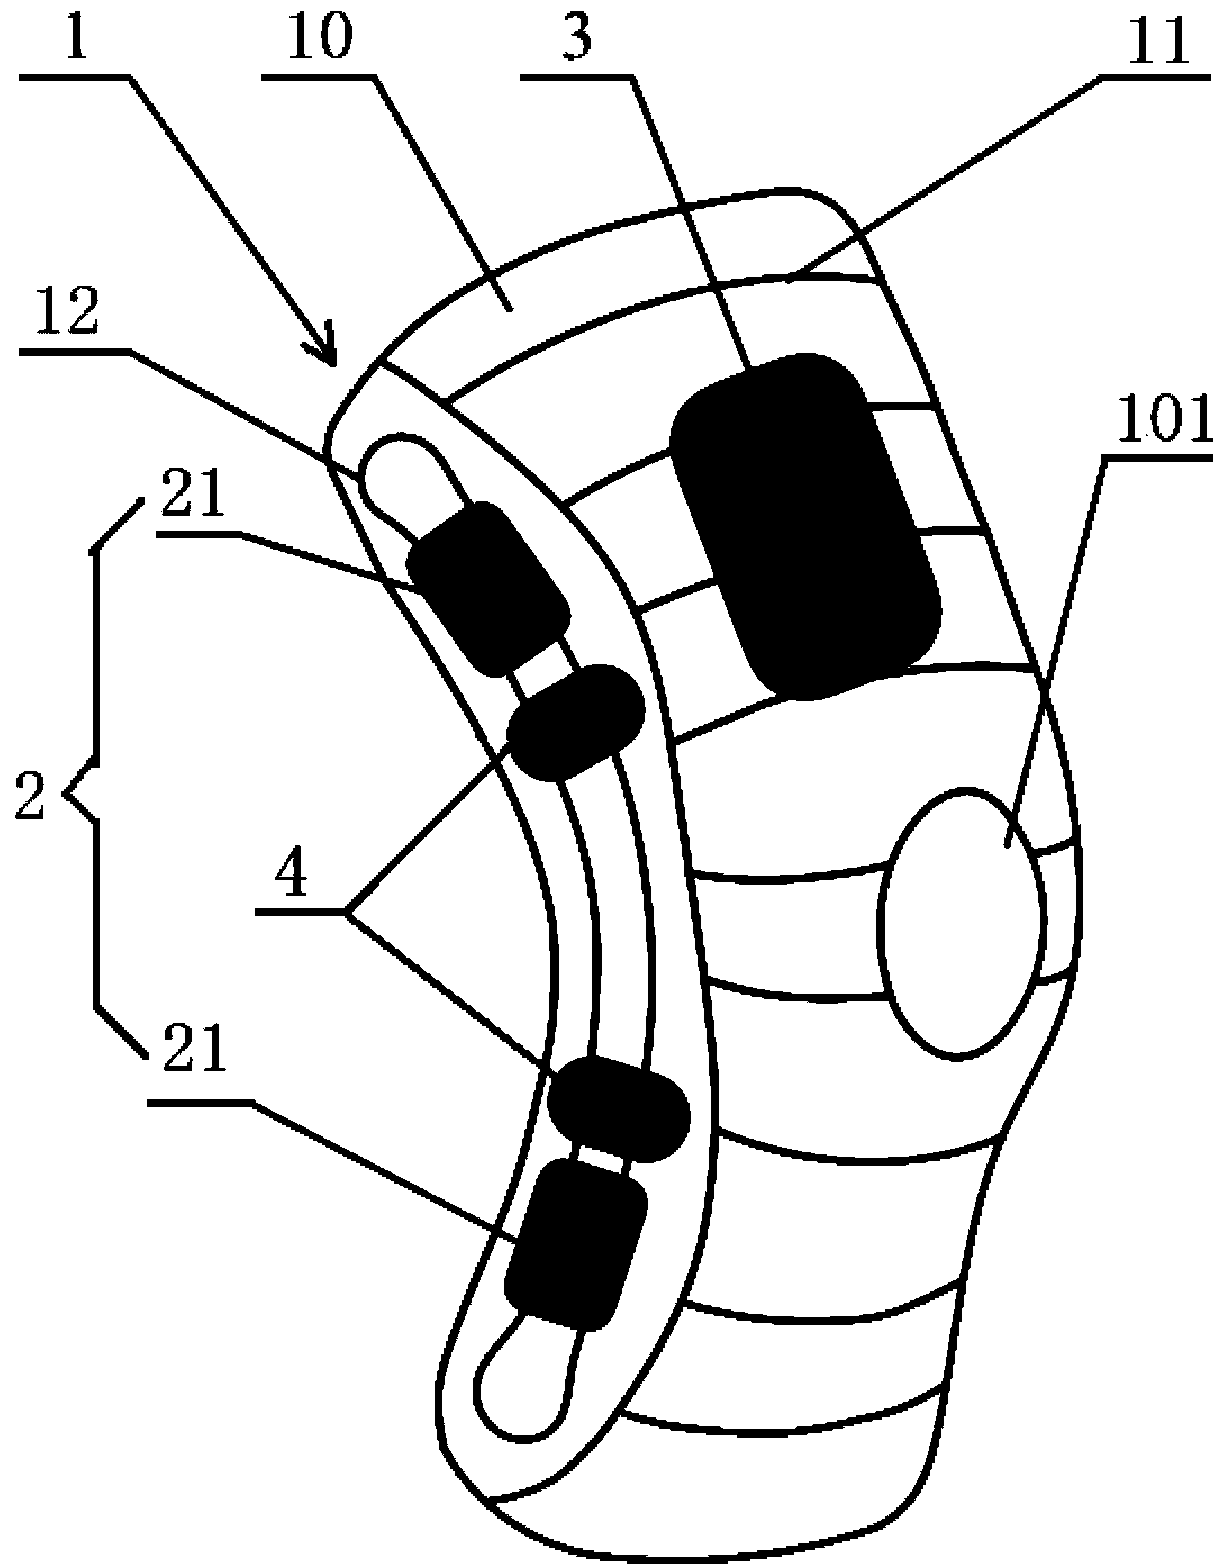 Wearable device for monitoring knee joint movement information